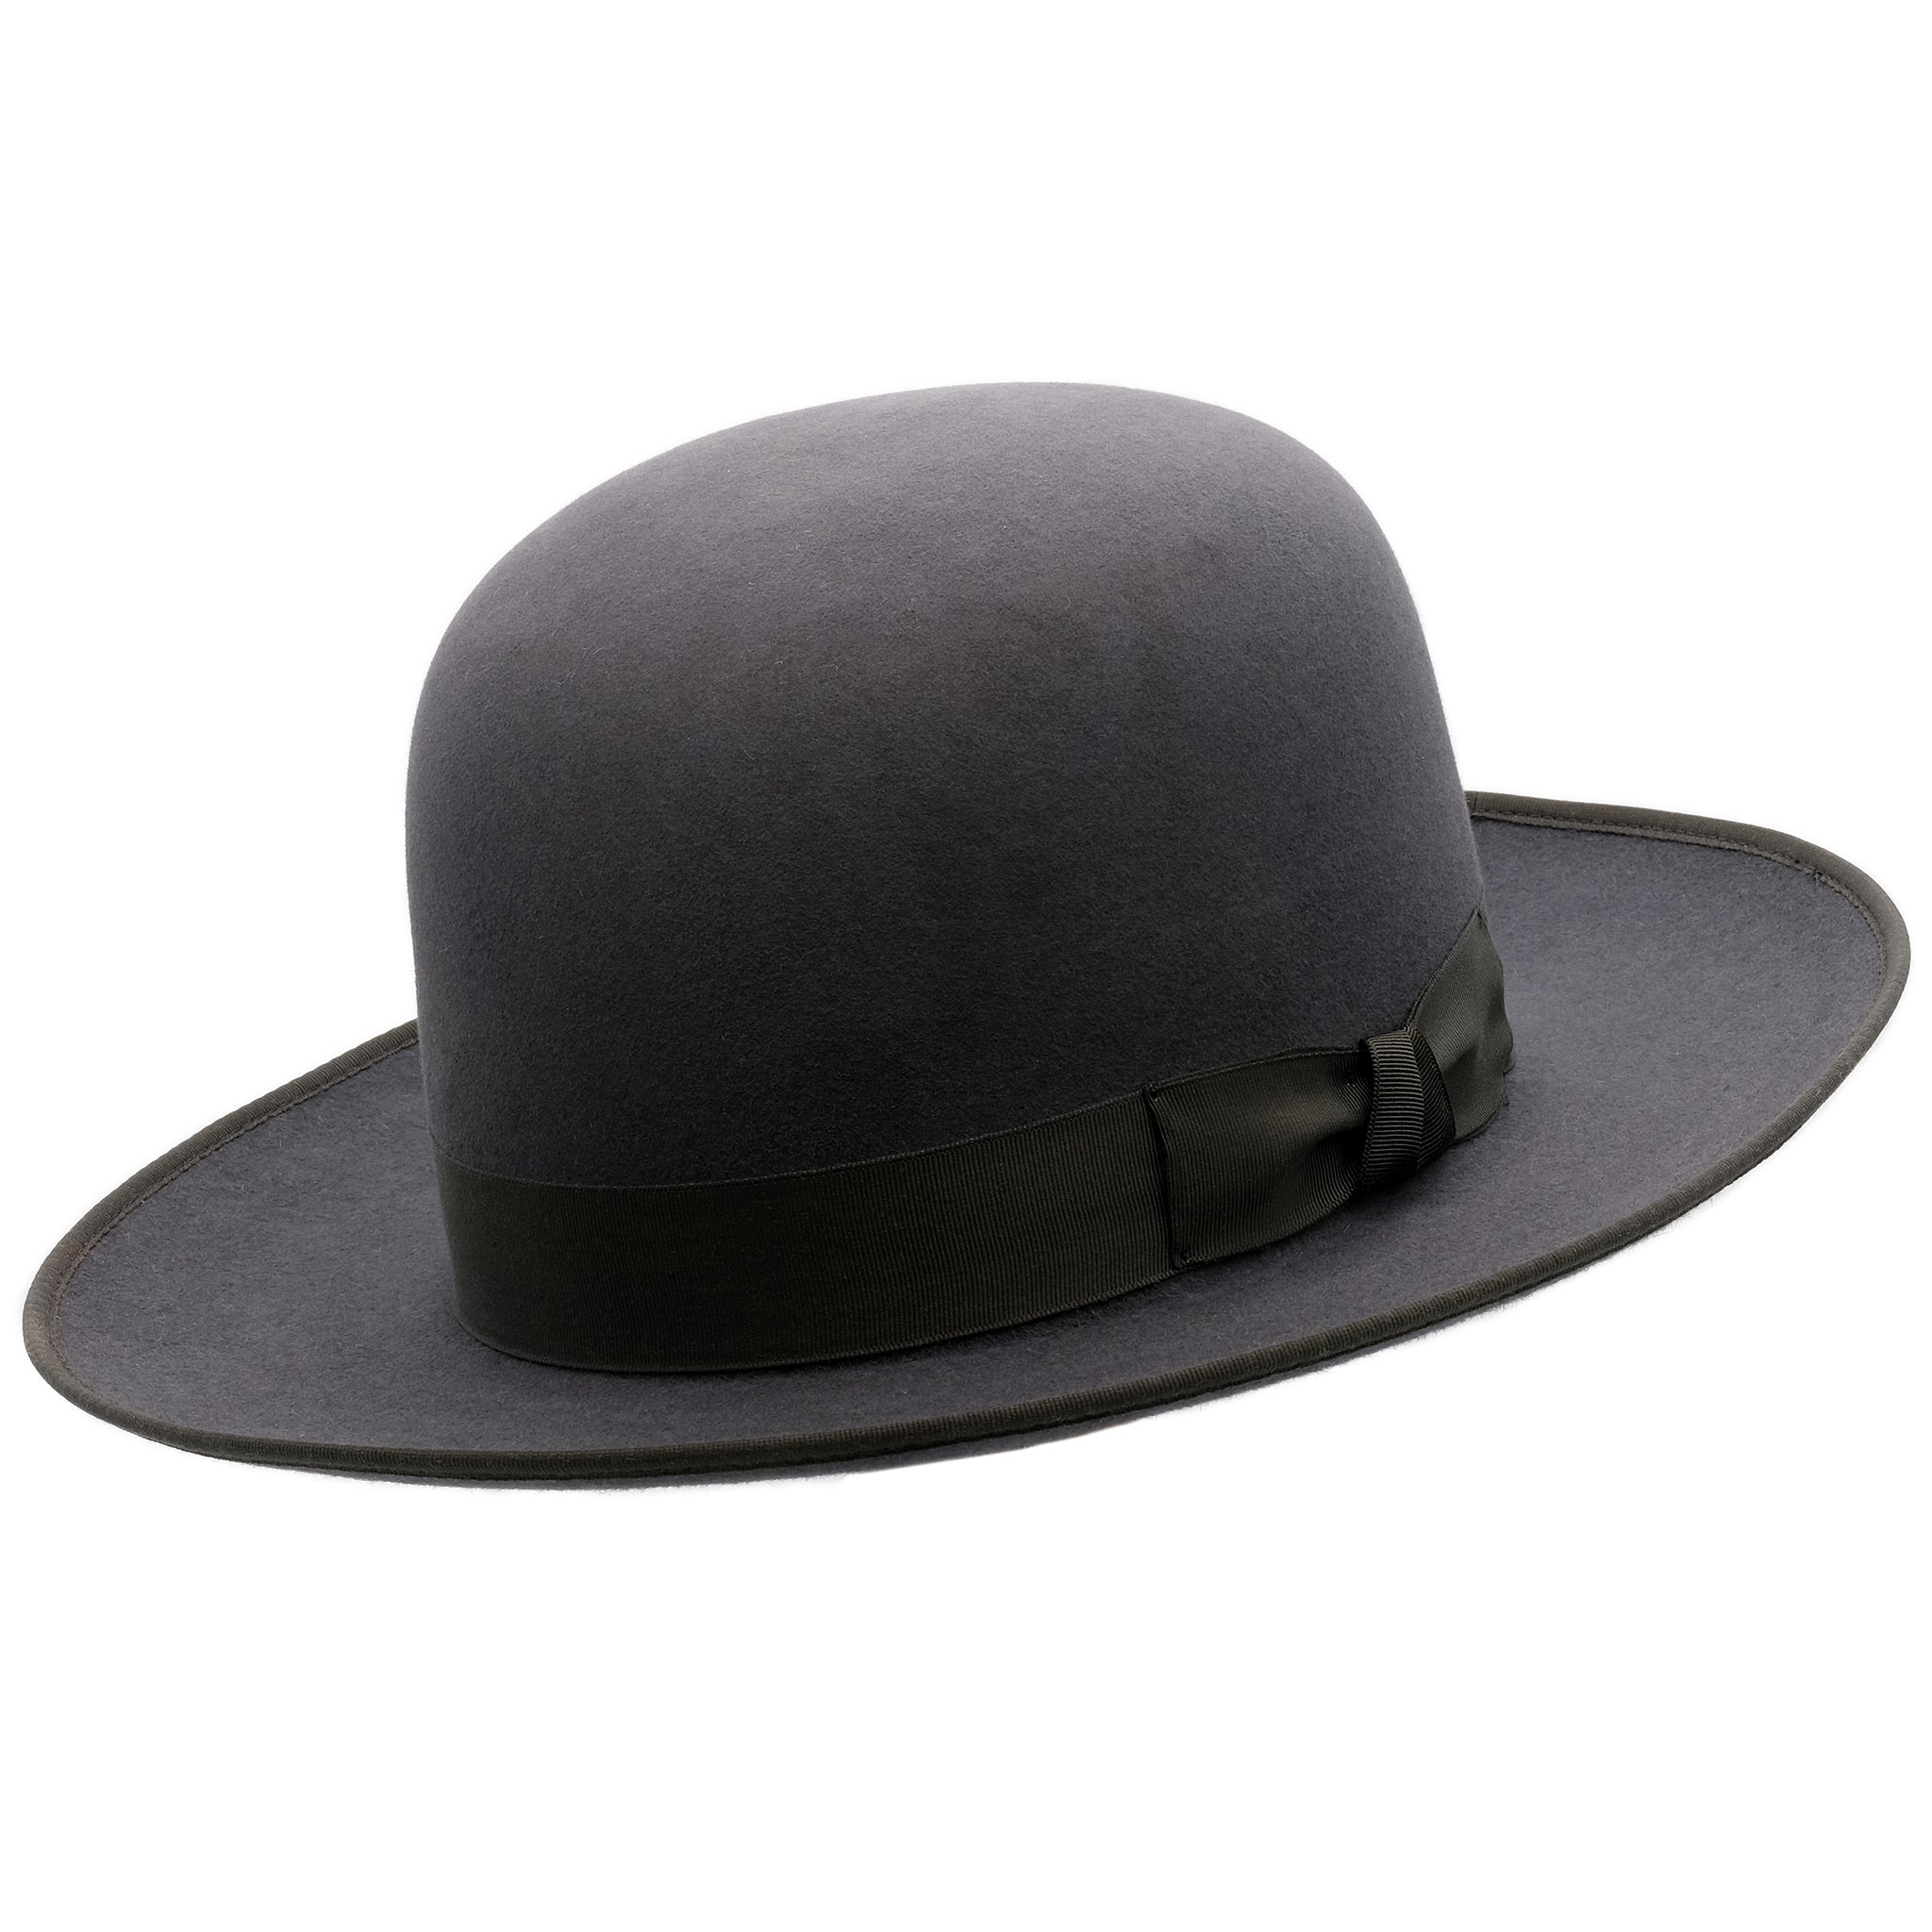 Angle view of Akubra Squatter hat in Carbon grey colour, shown with open crown